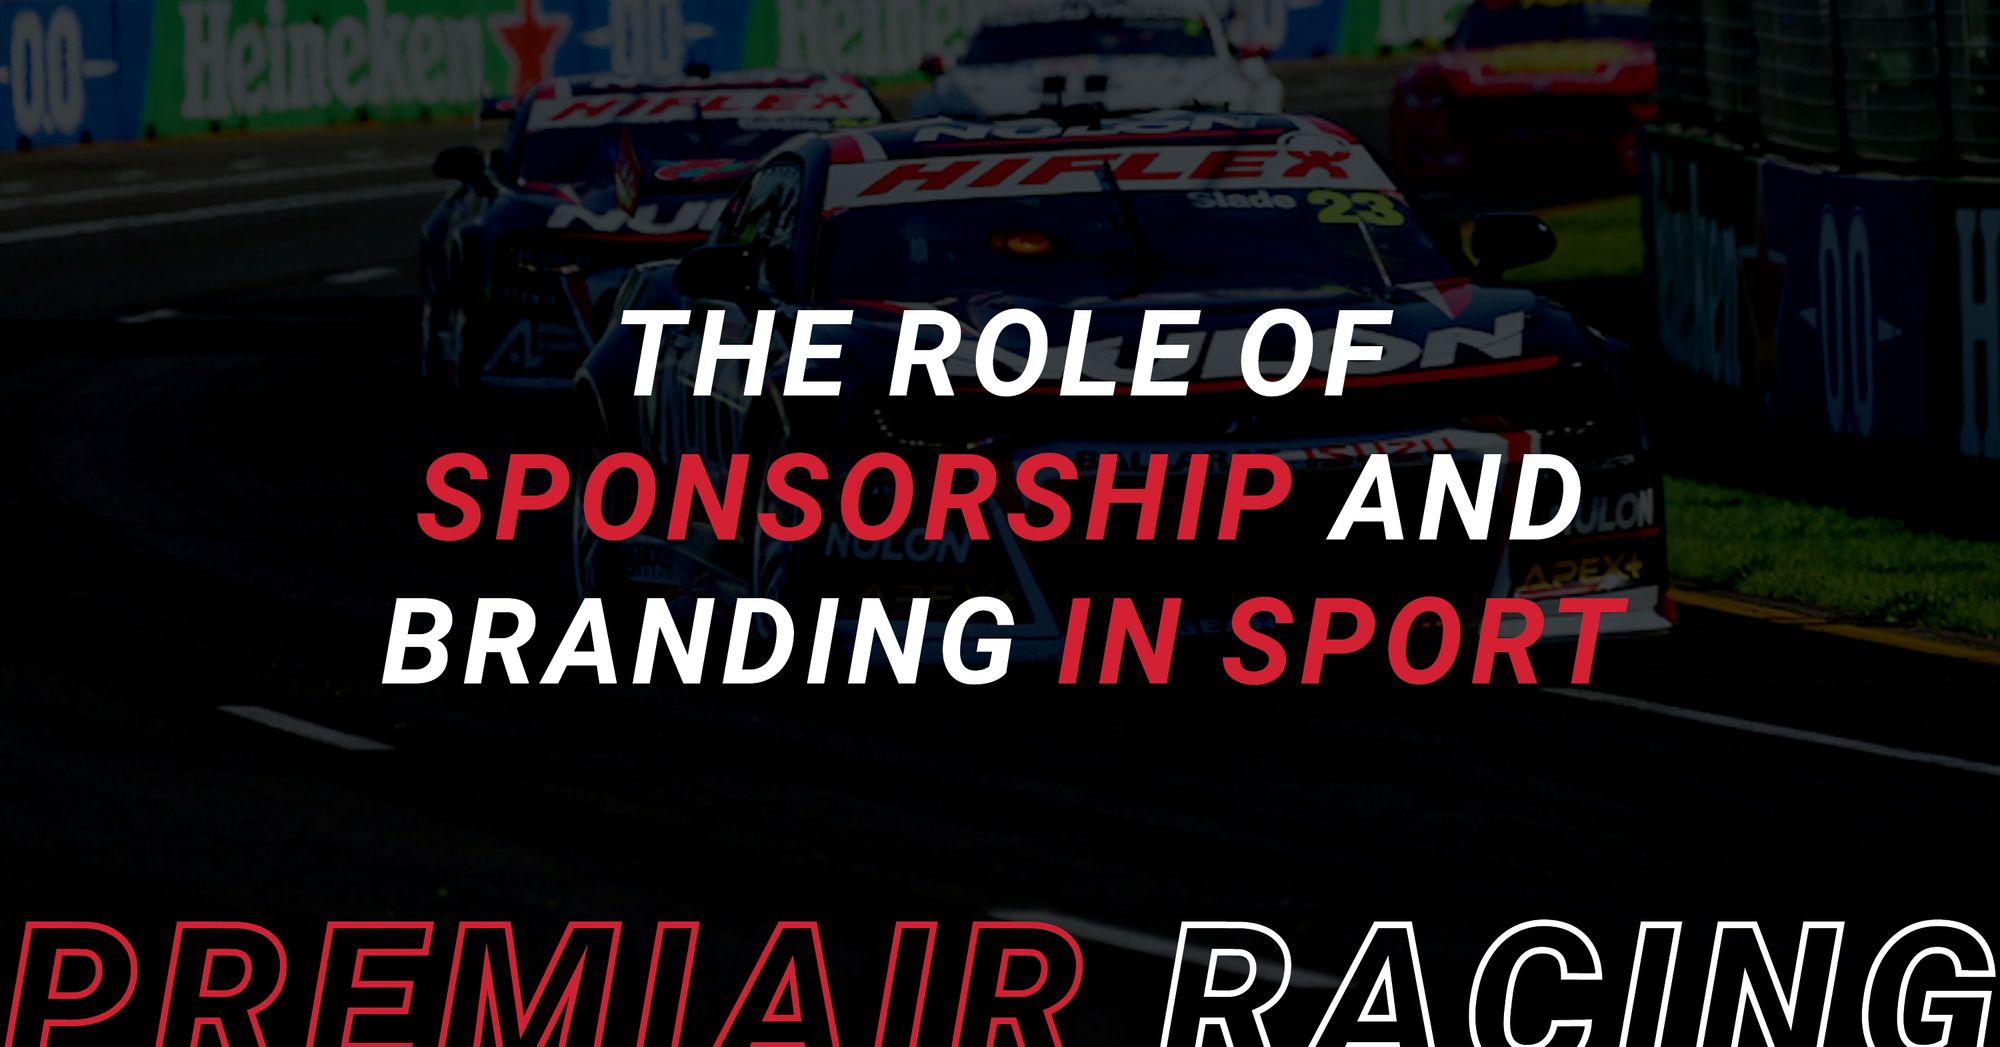 The Role of Sponsorship and Branding in Sport